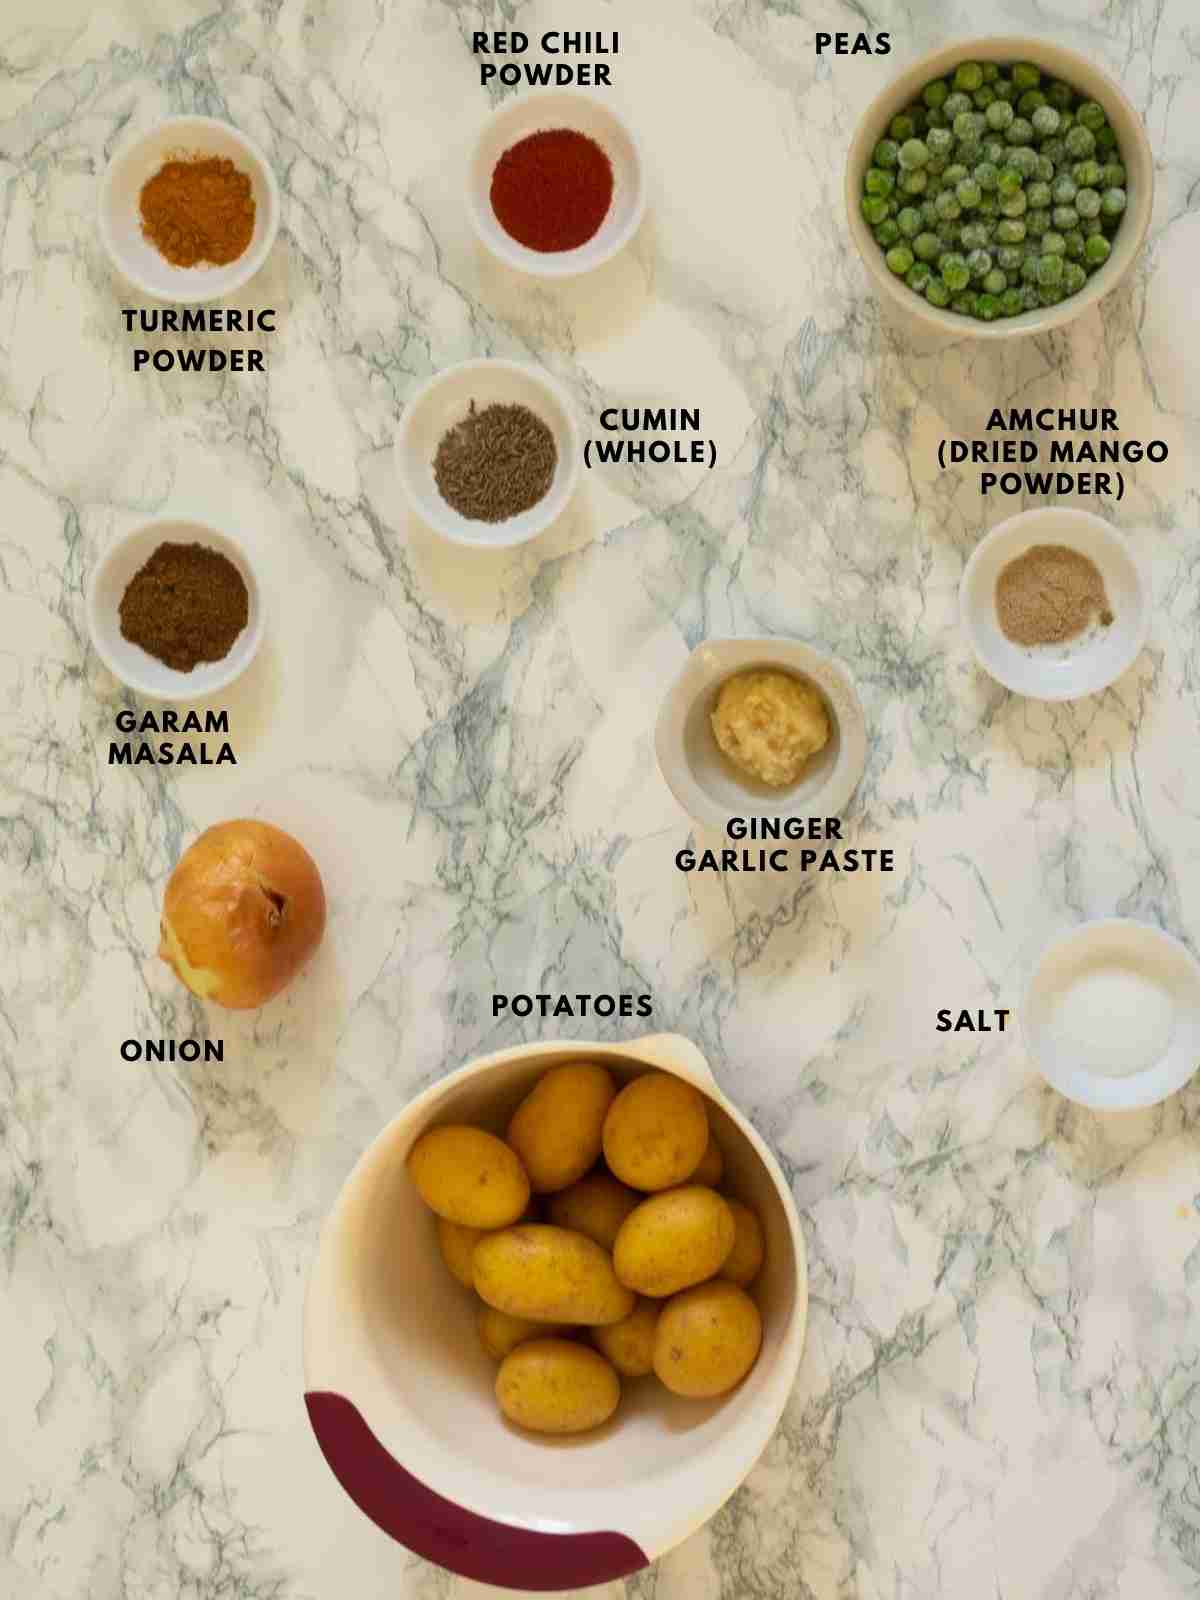 All ingredients used to make aloo matar curry